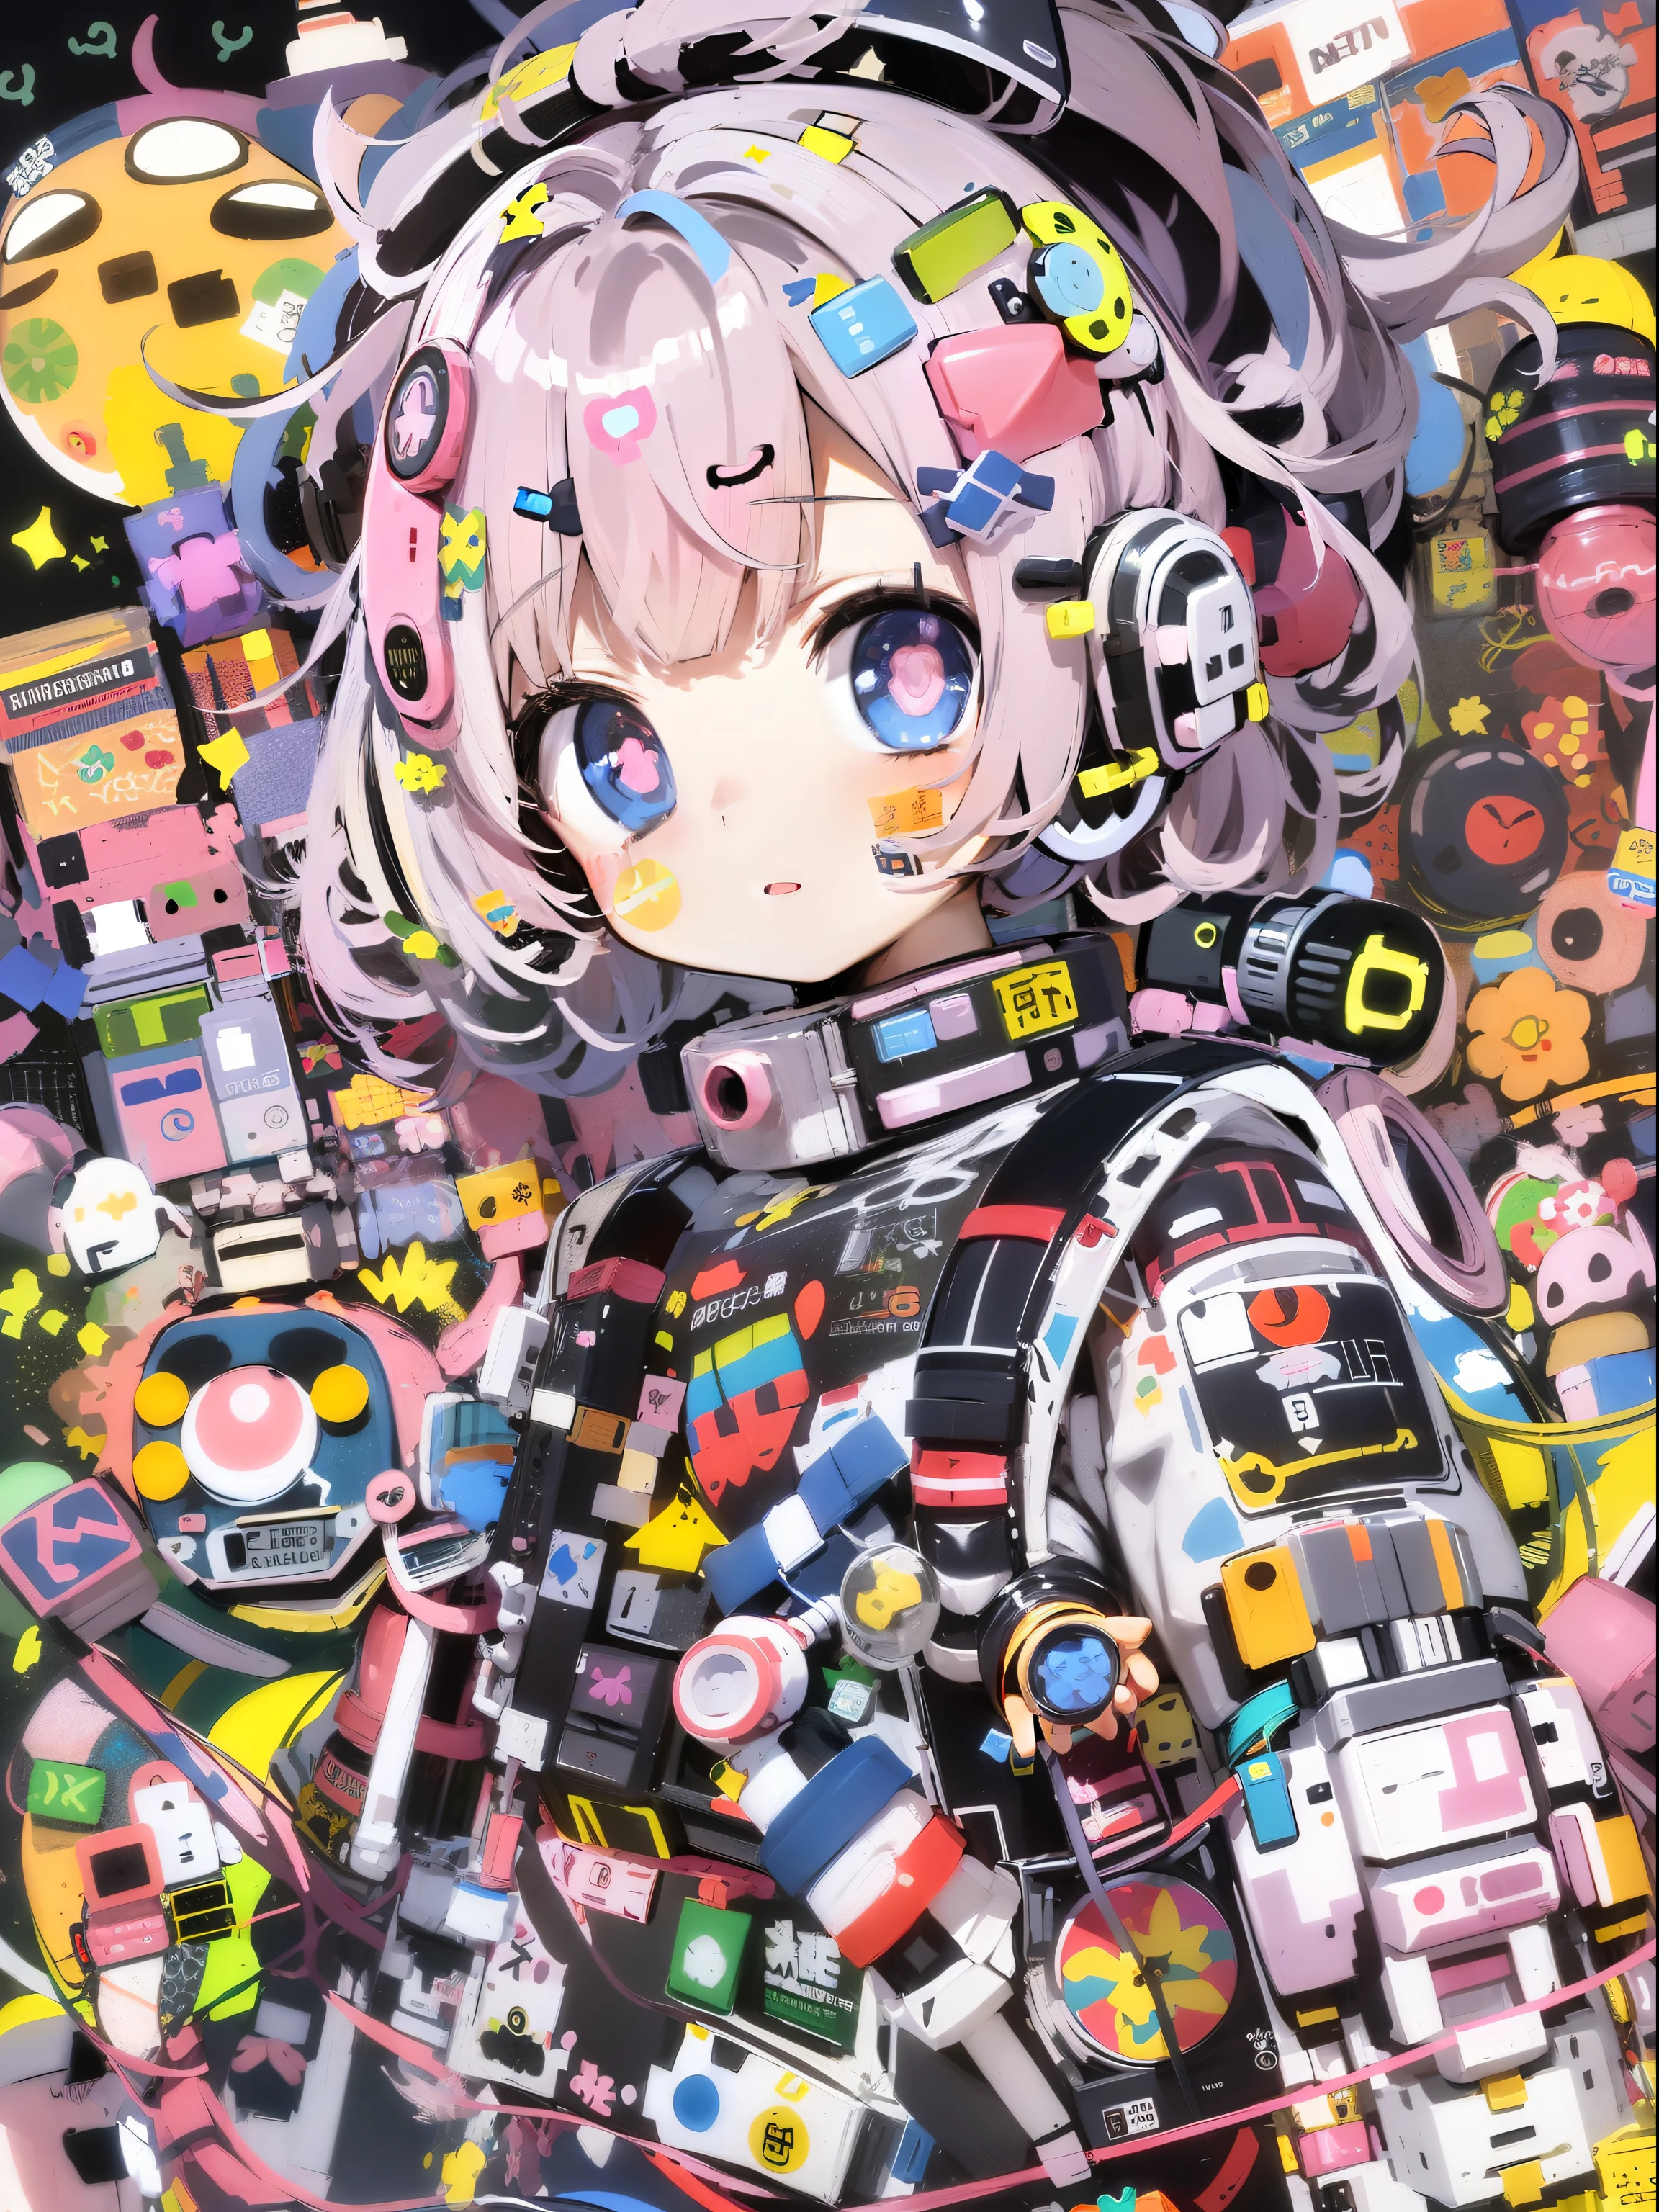 Anime girl with a lot of stickers on her head, decora inspired illustrations, best anime 4k konachan wallpaper, anime robotic mixed with organic, fully robotic!! girl, Anime Manga Robot!! Anime Girl, portrait anime space cadet girl, dreamy psychedelic anime, Anime Mecha Aesthetics, Robot Girl, splash art anime , decora inspired, hyper colorful